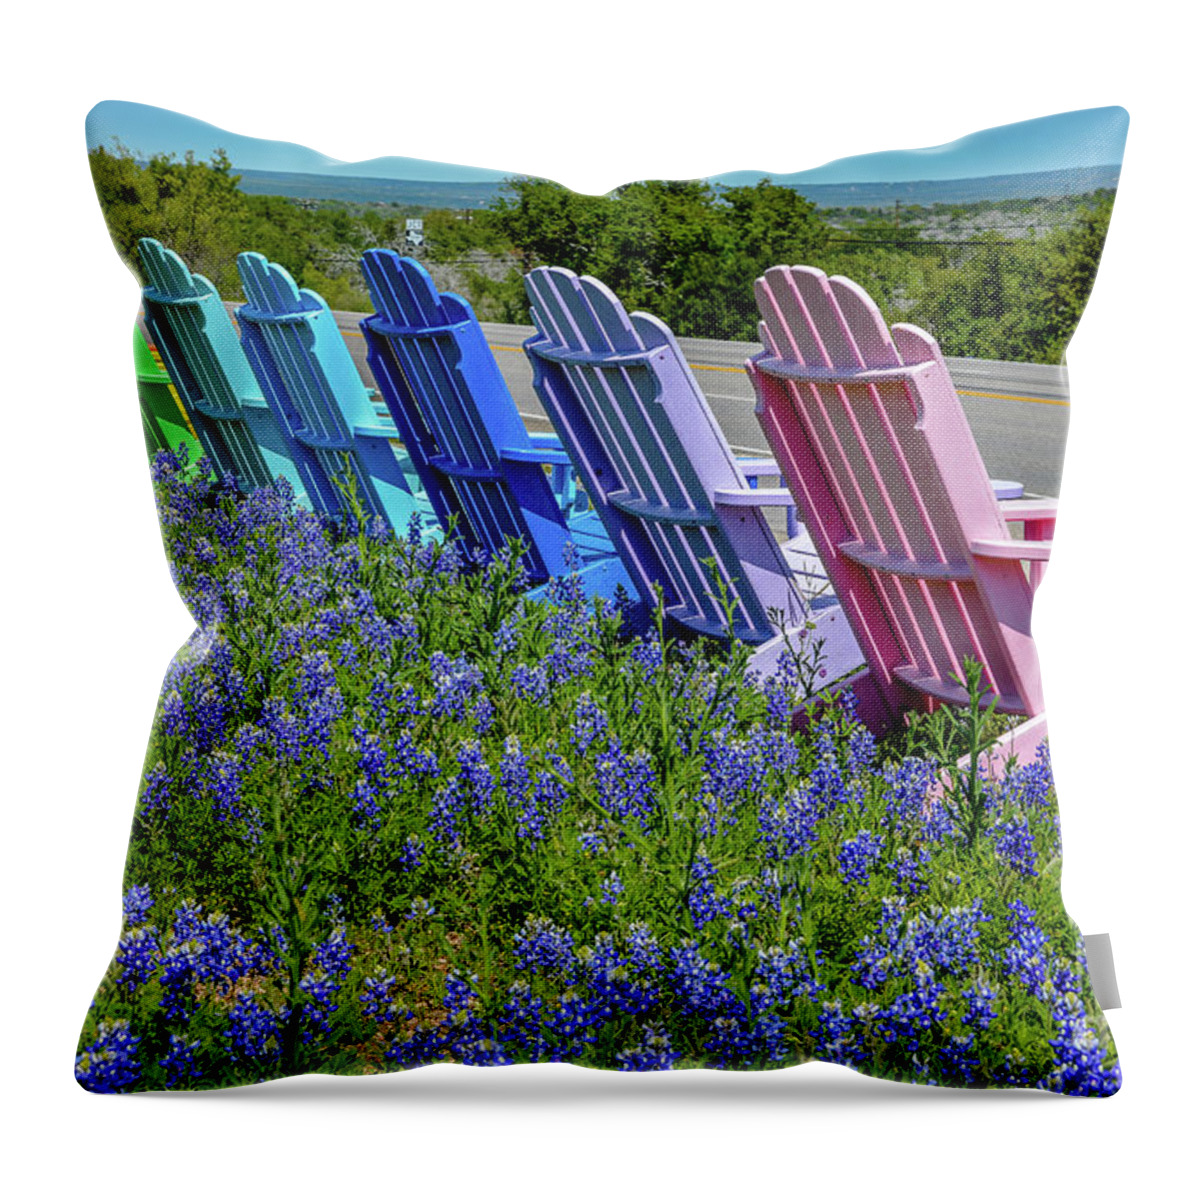 Bluebonnets Throw Pillow featuring the photograph Bluebonnets and chairs by David Meznarich